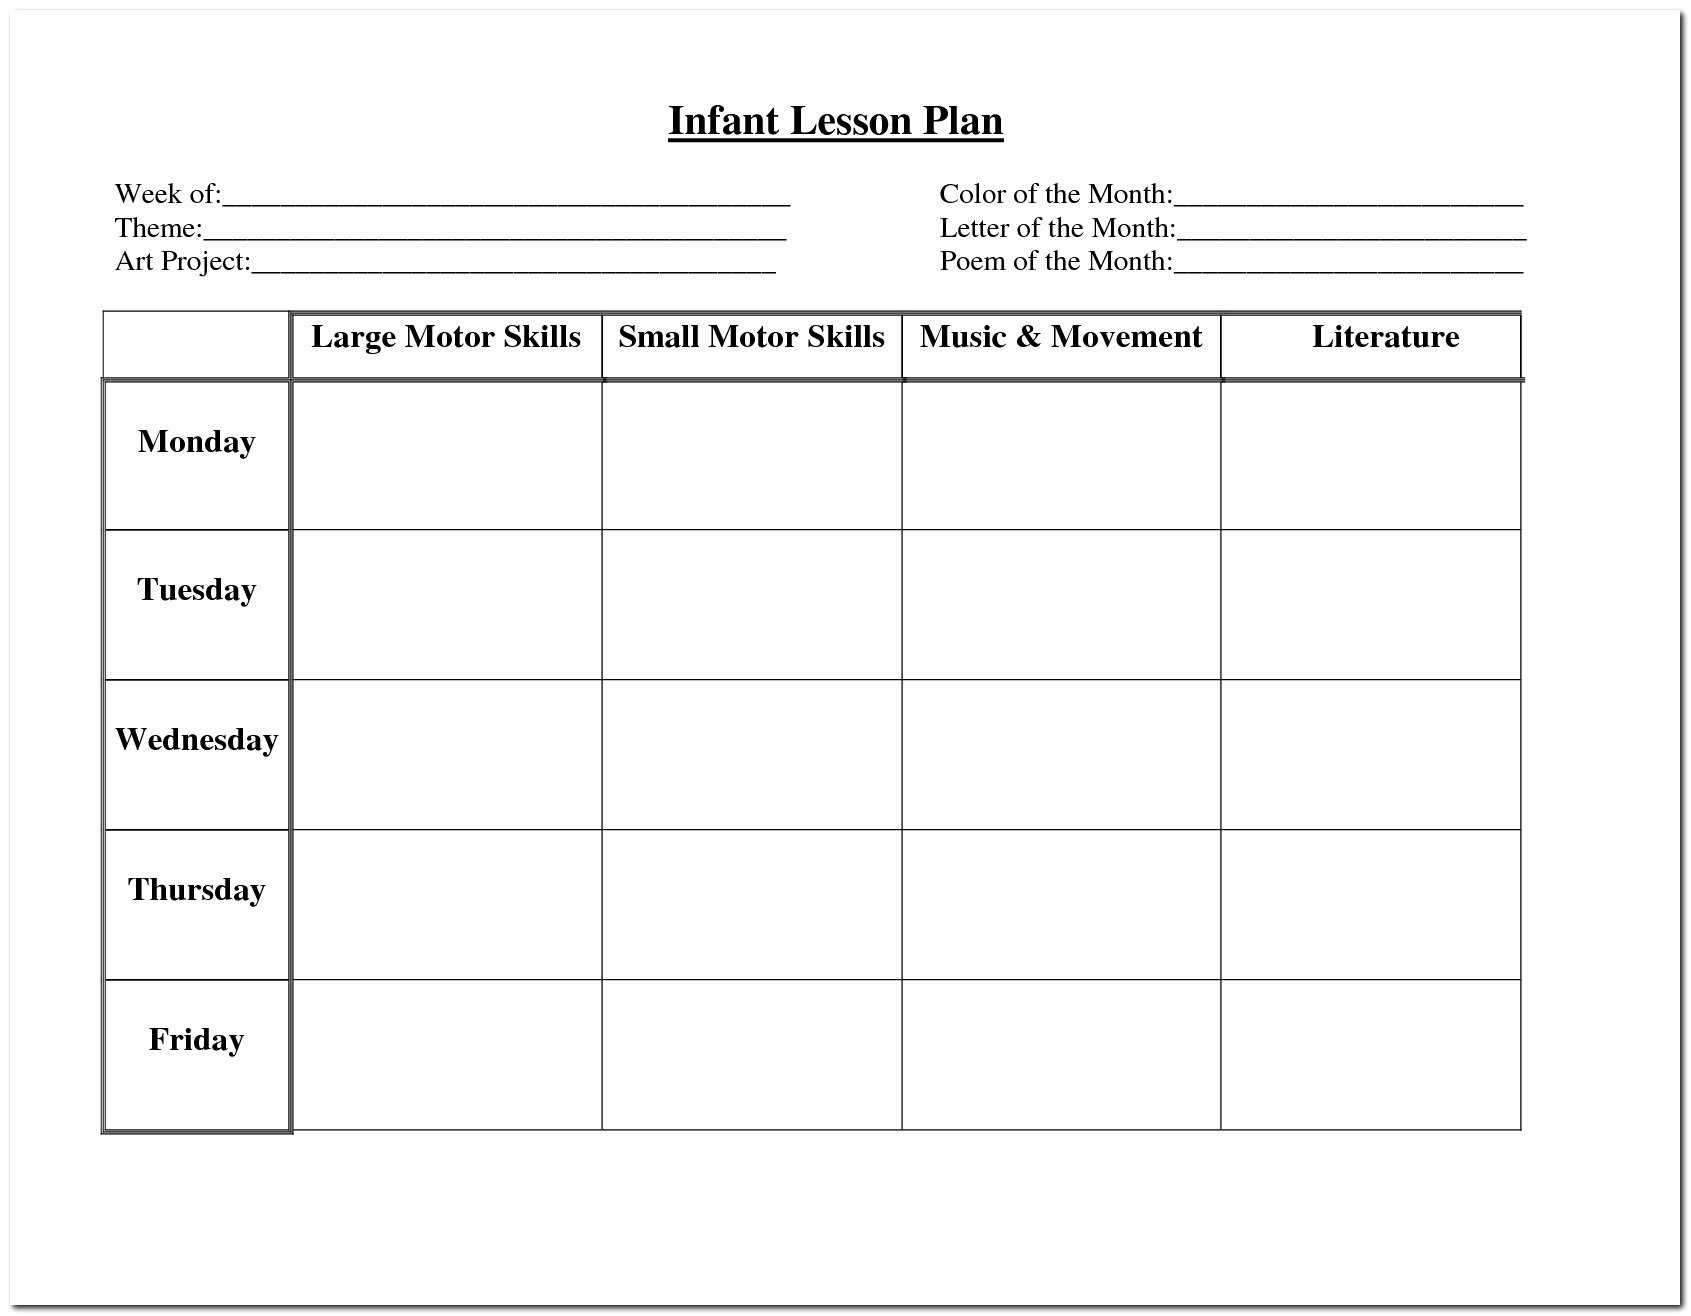 022 Blank Lesson Plan Template For Pre K Business Free Within Blank Preschool Lesson Plan Template